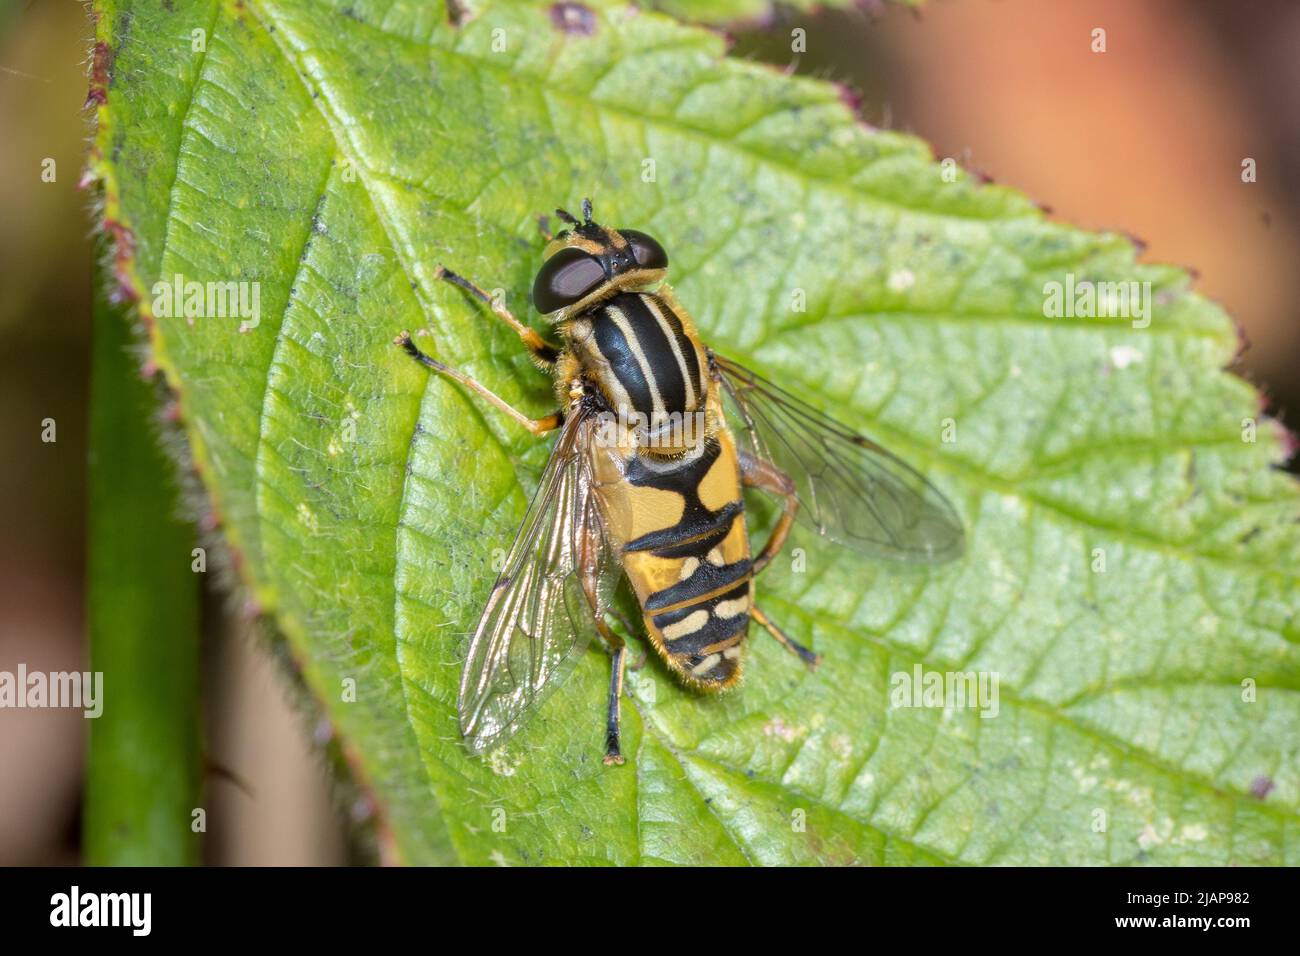 A hover fly (Heliophilus sp) basking on a leaf. Taken at Hawthorn Hive near Seaham, UK. Stock Photo